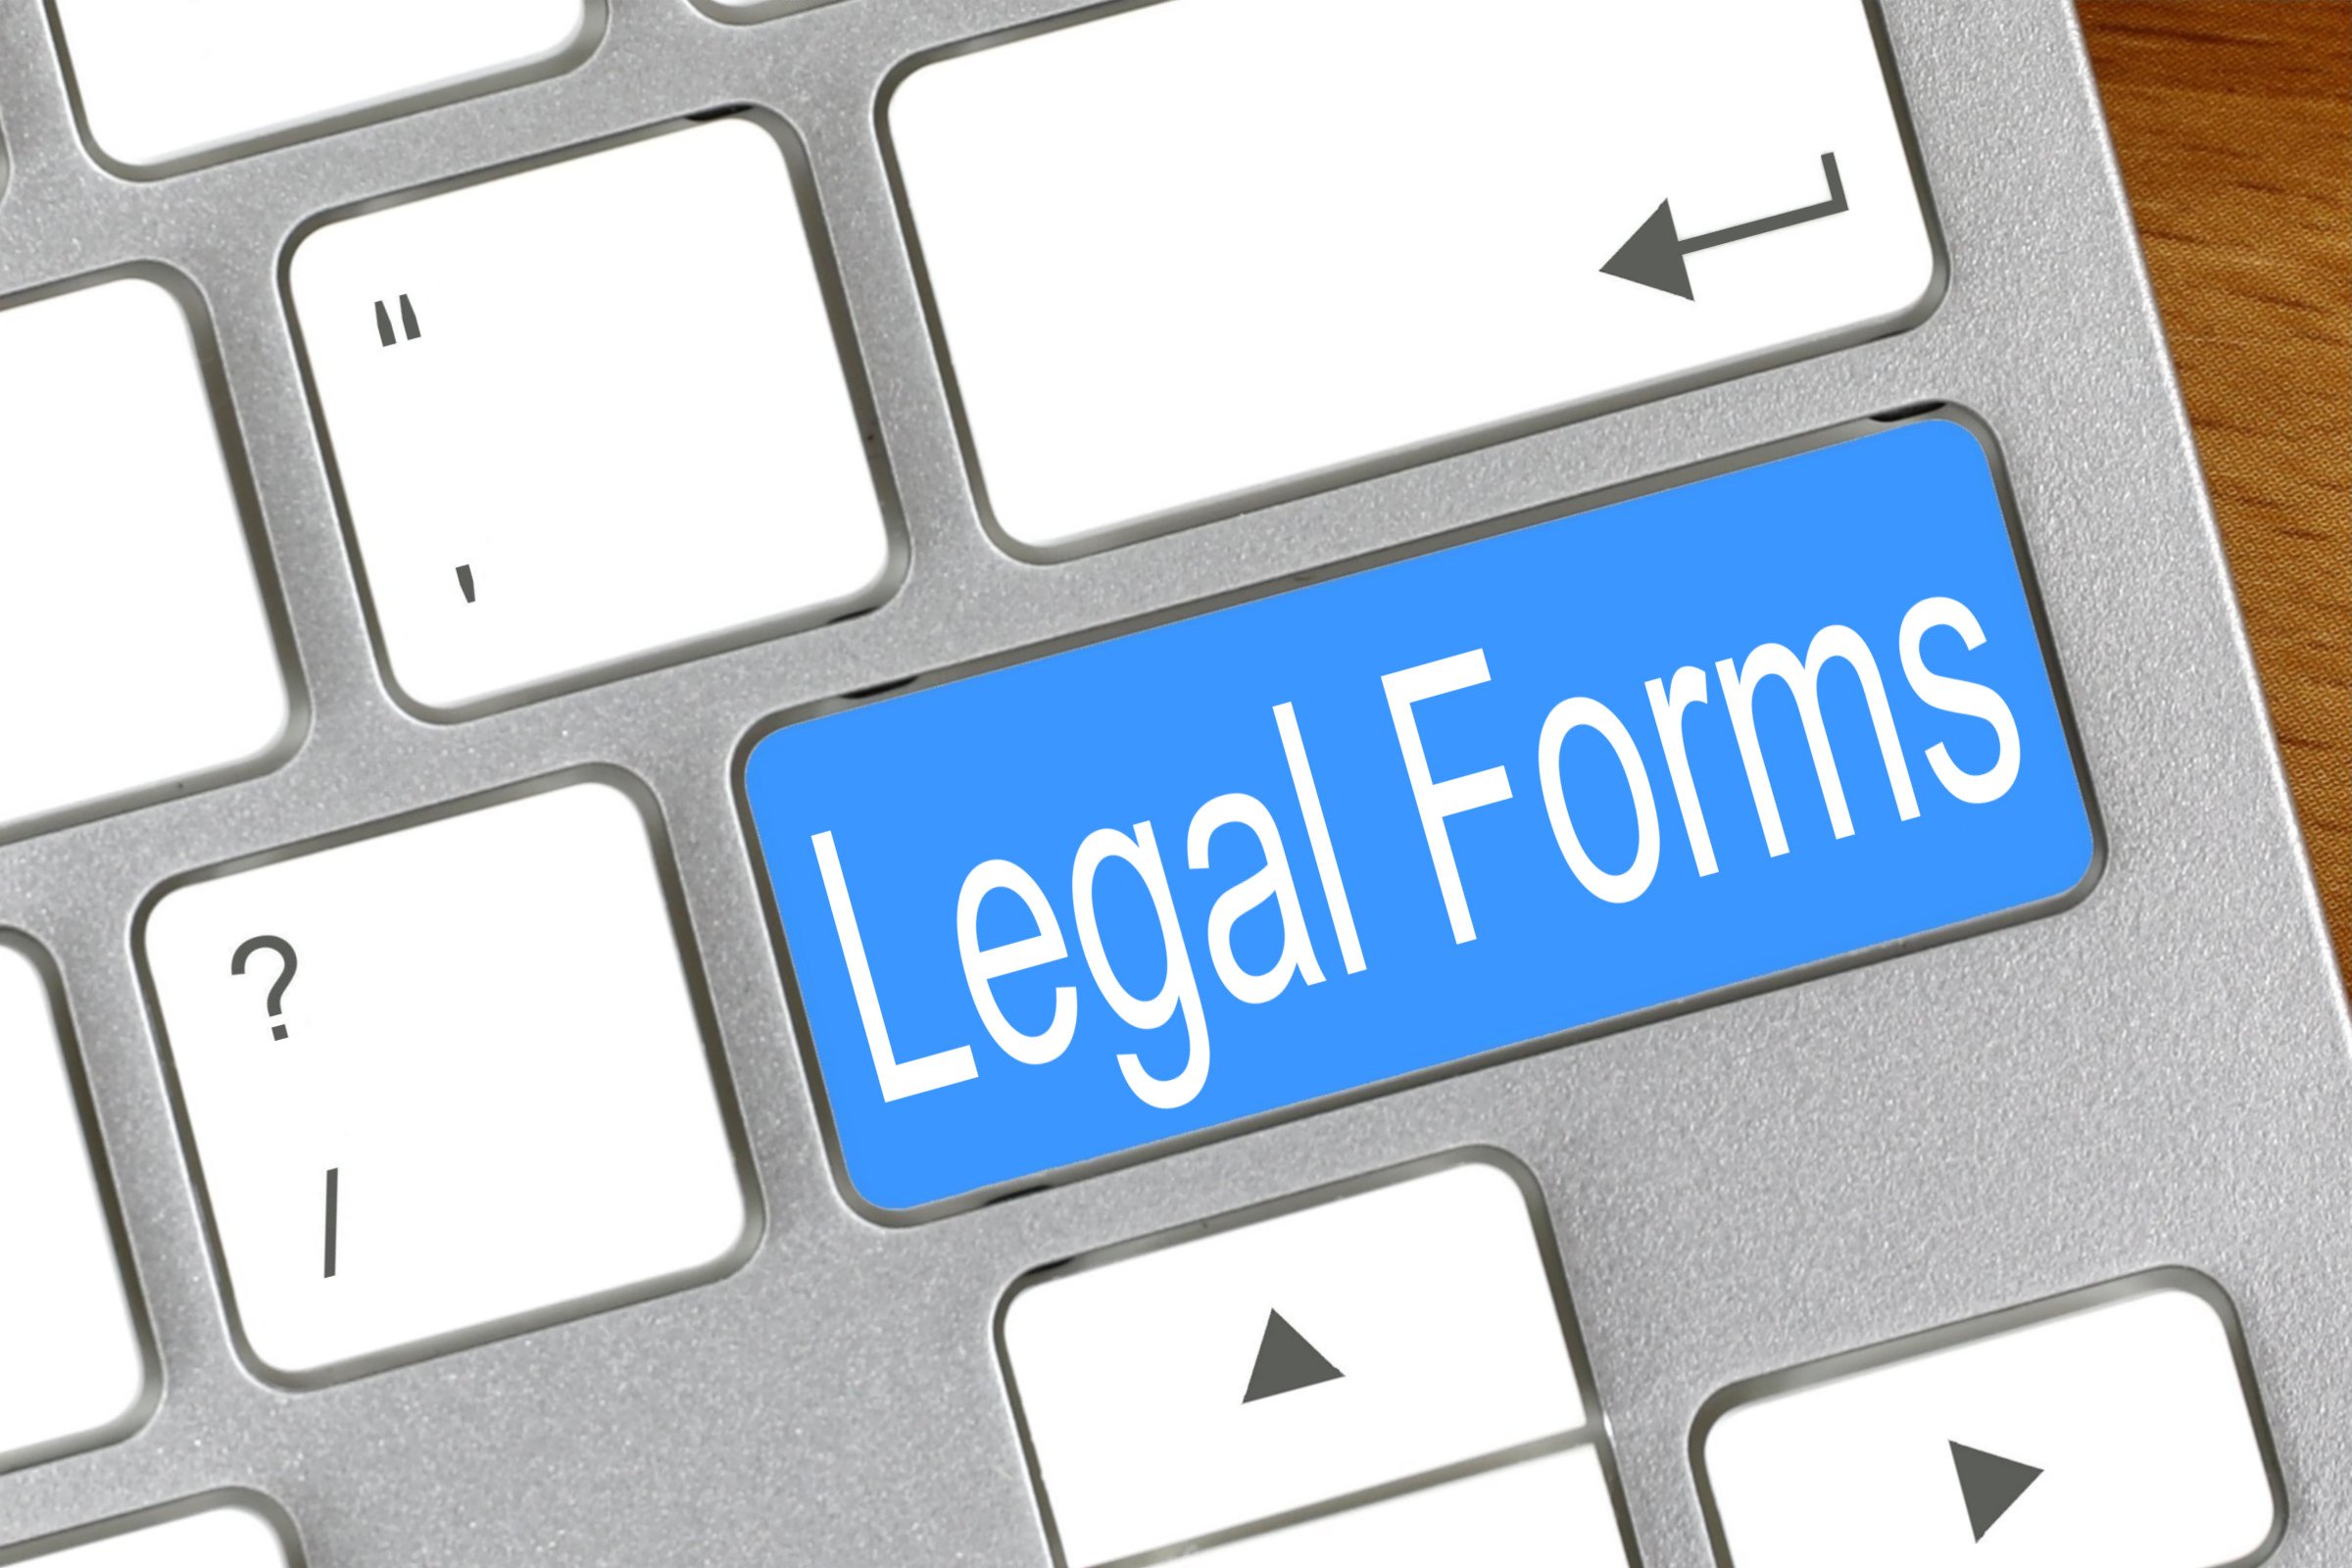 legal forms